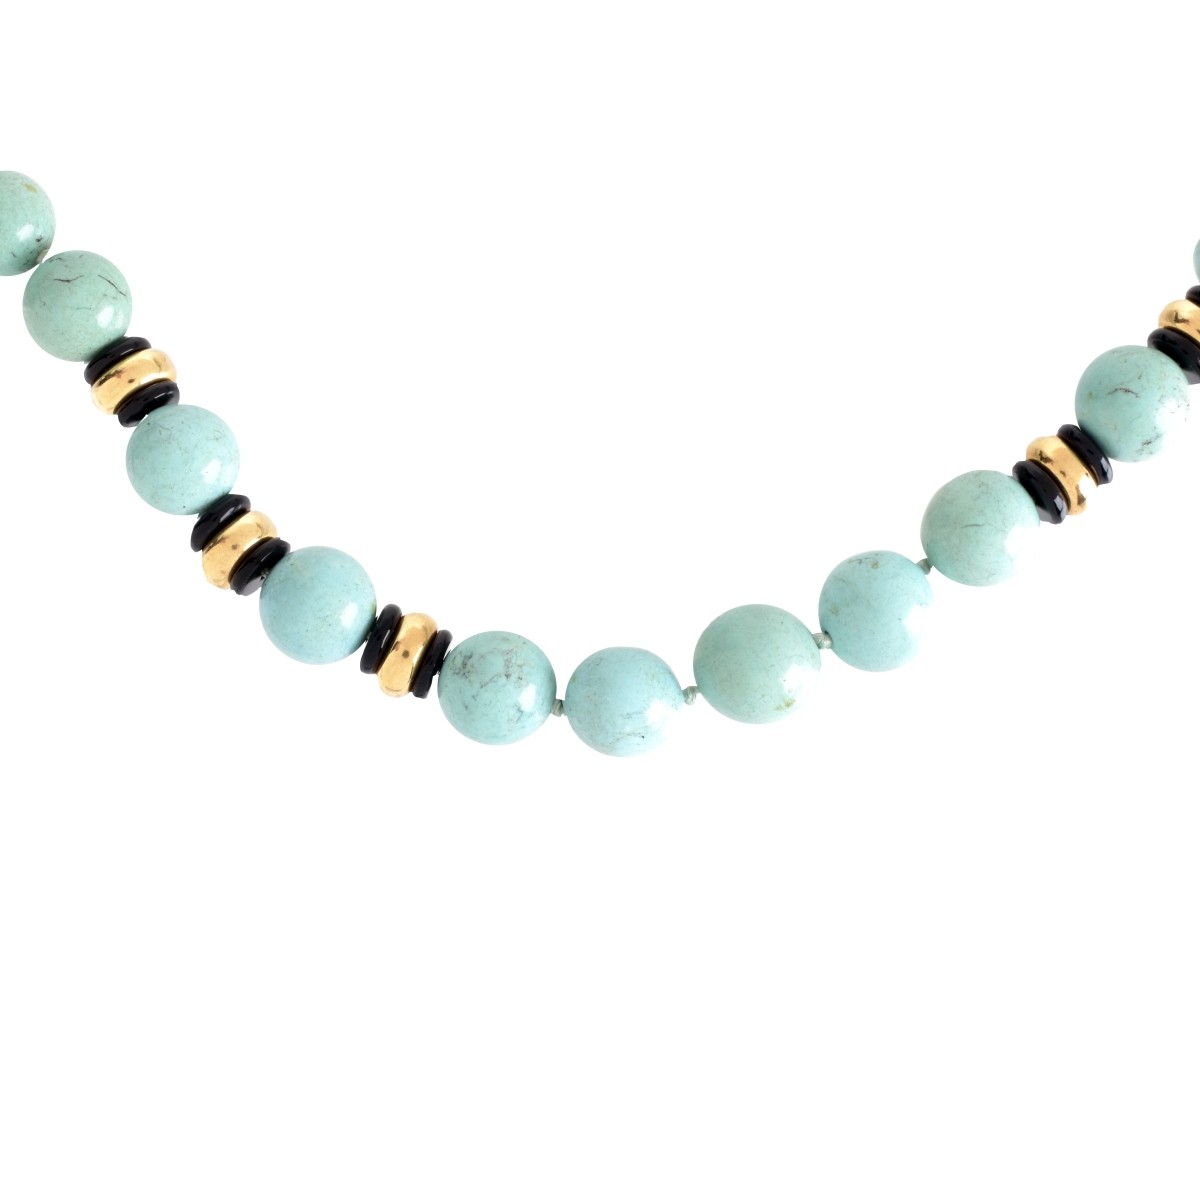 Vintage Turquoise and Black Onyx Necklace